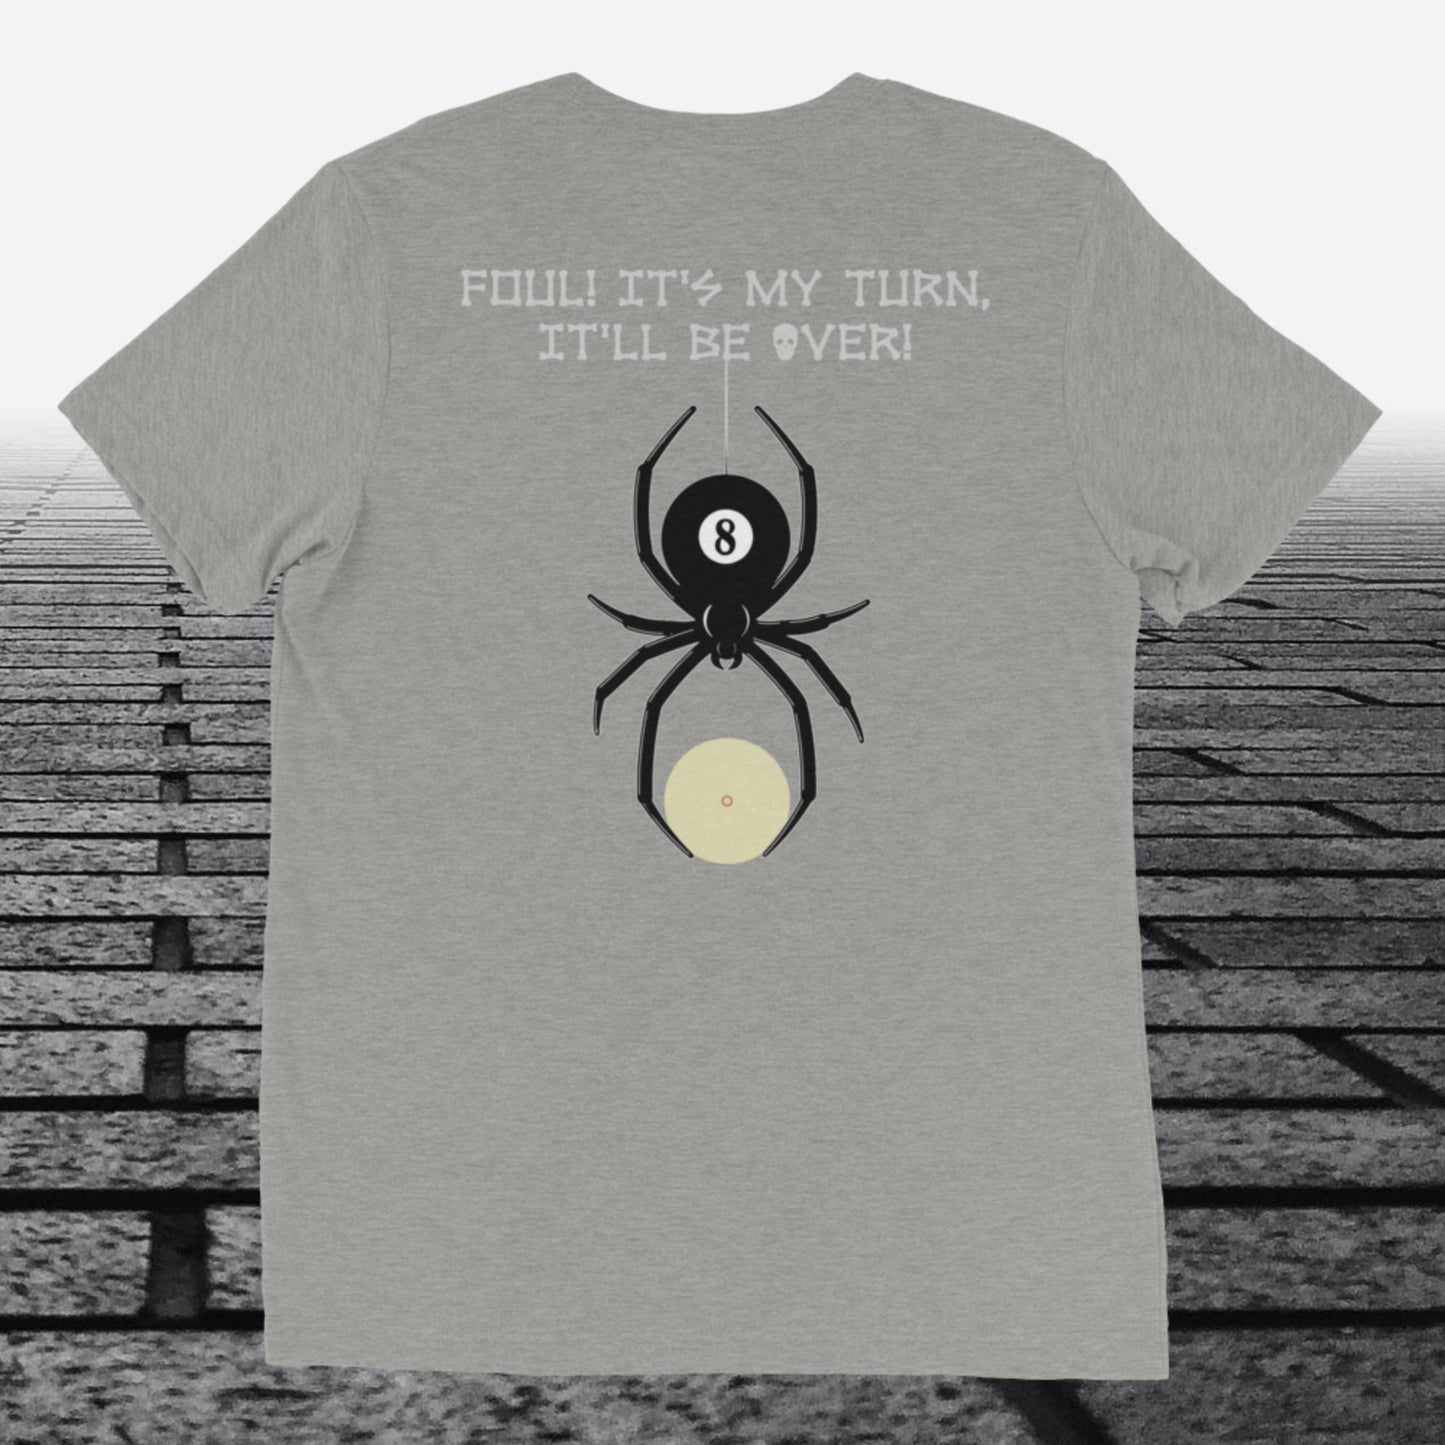 Foul, It's my turn, It'll be over, with logo on the front, Tri-blend t-shirt